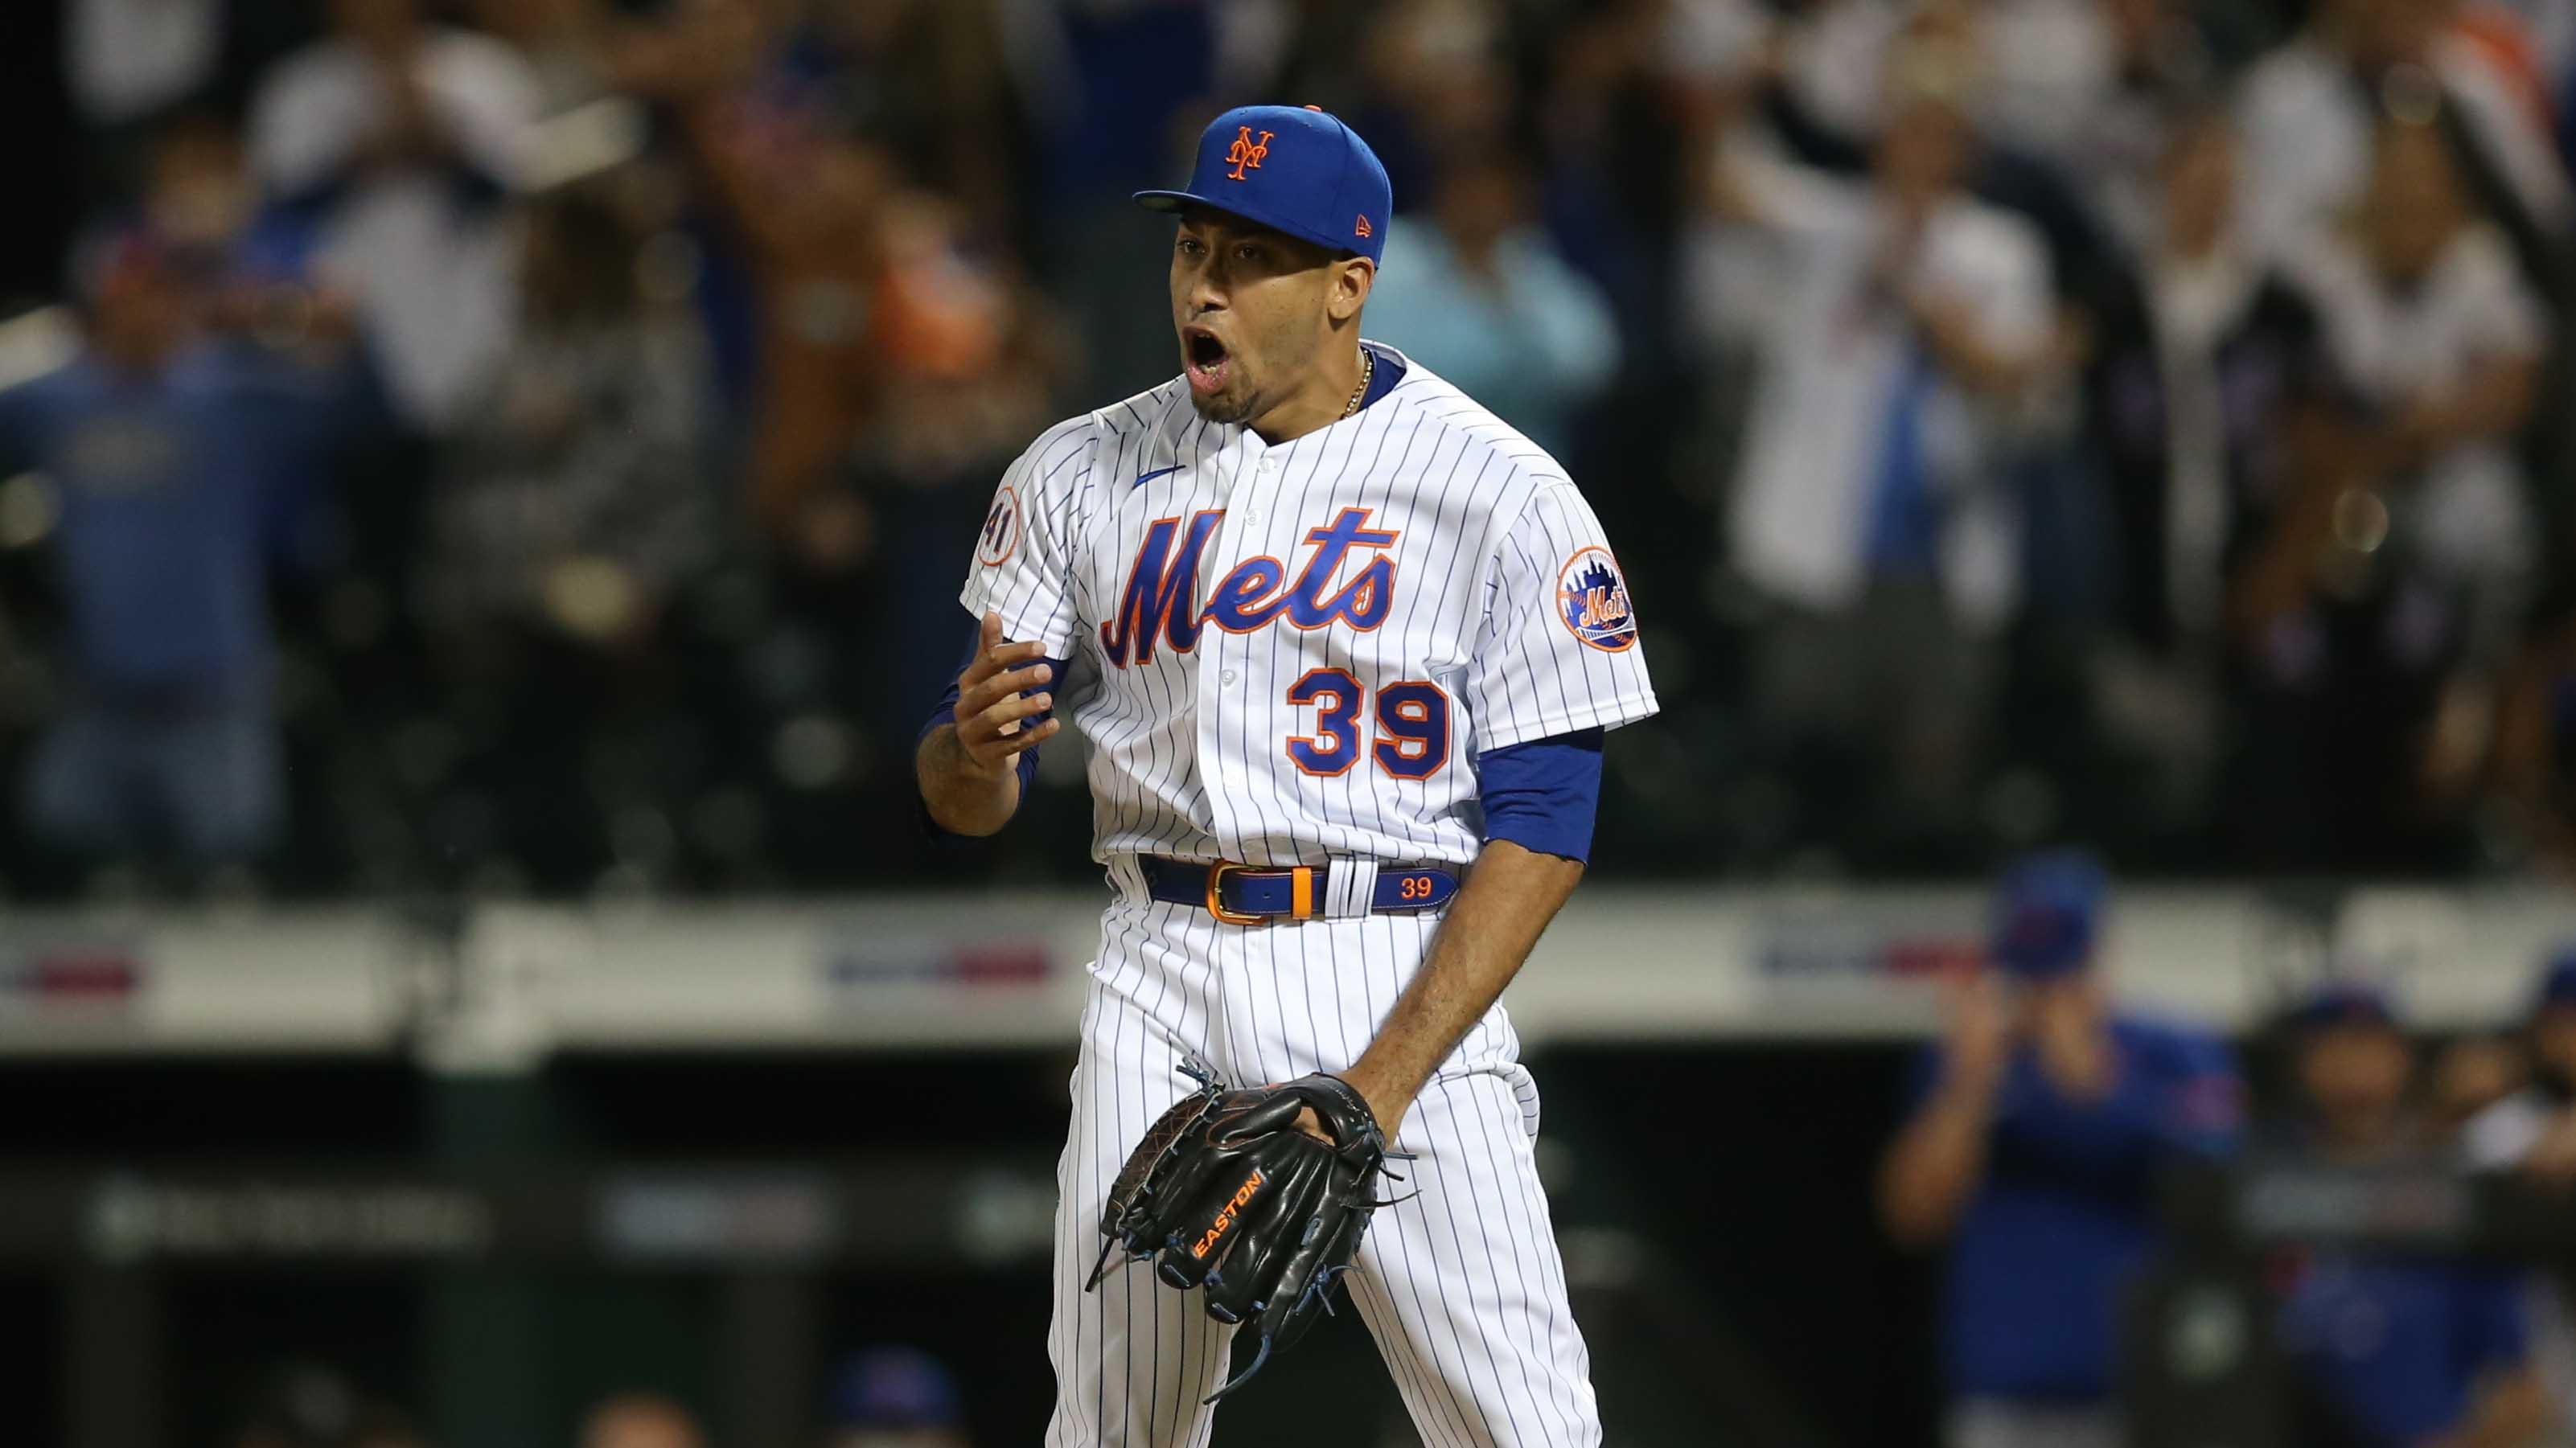 Jun 14, 2021; New York City, New York, USA; New York Mets relief pitcher Edwin Diaz (39) reacts after defeating the Chicago Cubs at Citi Field. / Brad Penner-USA TODAY Sports